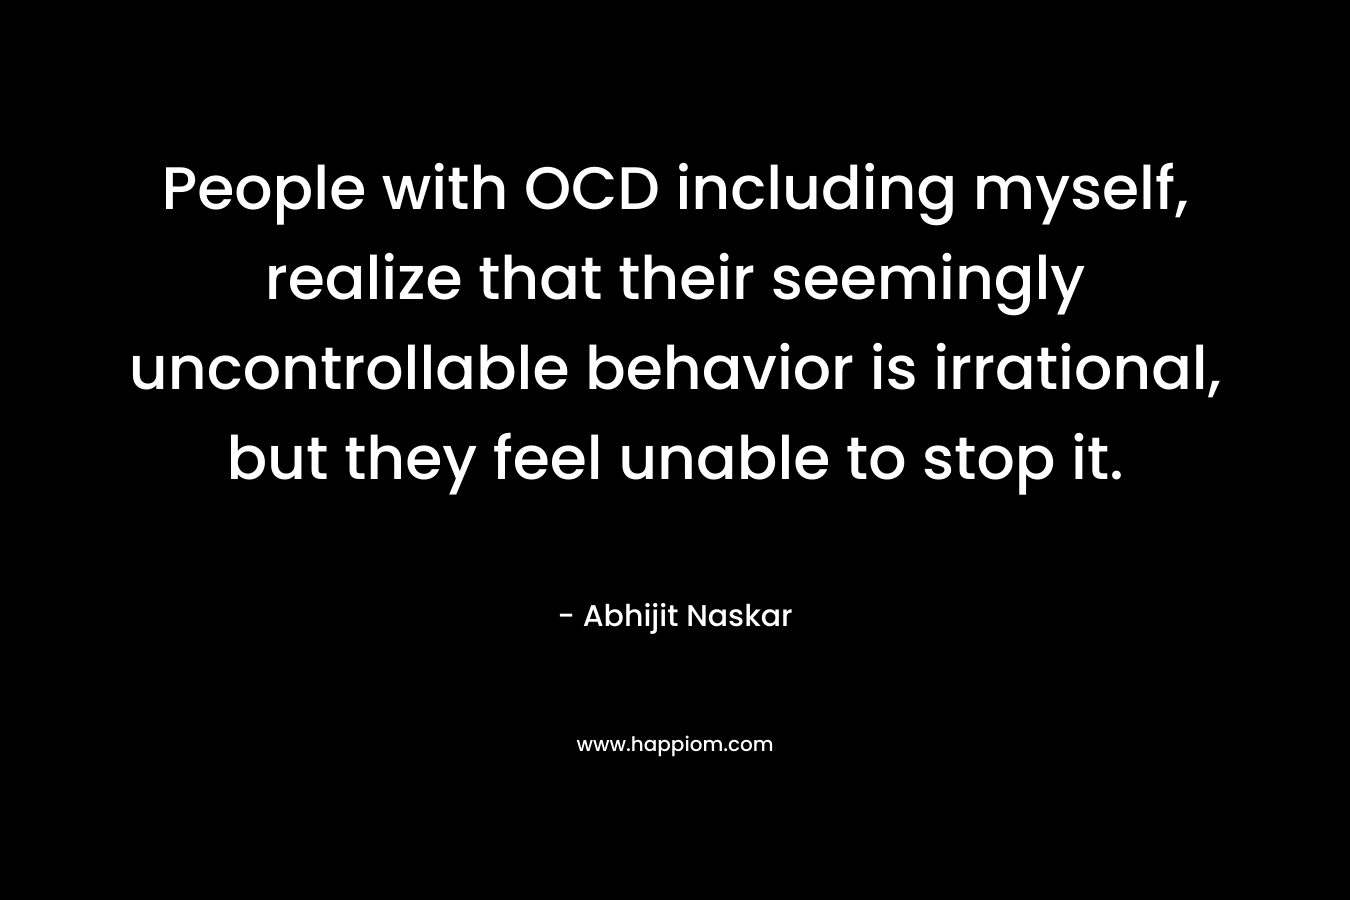 People with OCD including myself, realize that their seemingly uncontrollable behavior is irrational, but they feel unable to stop it.